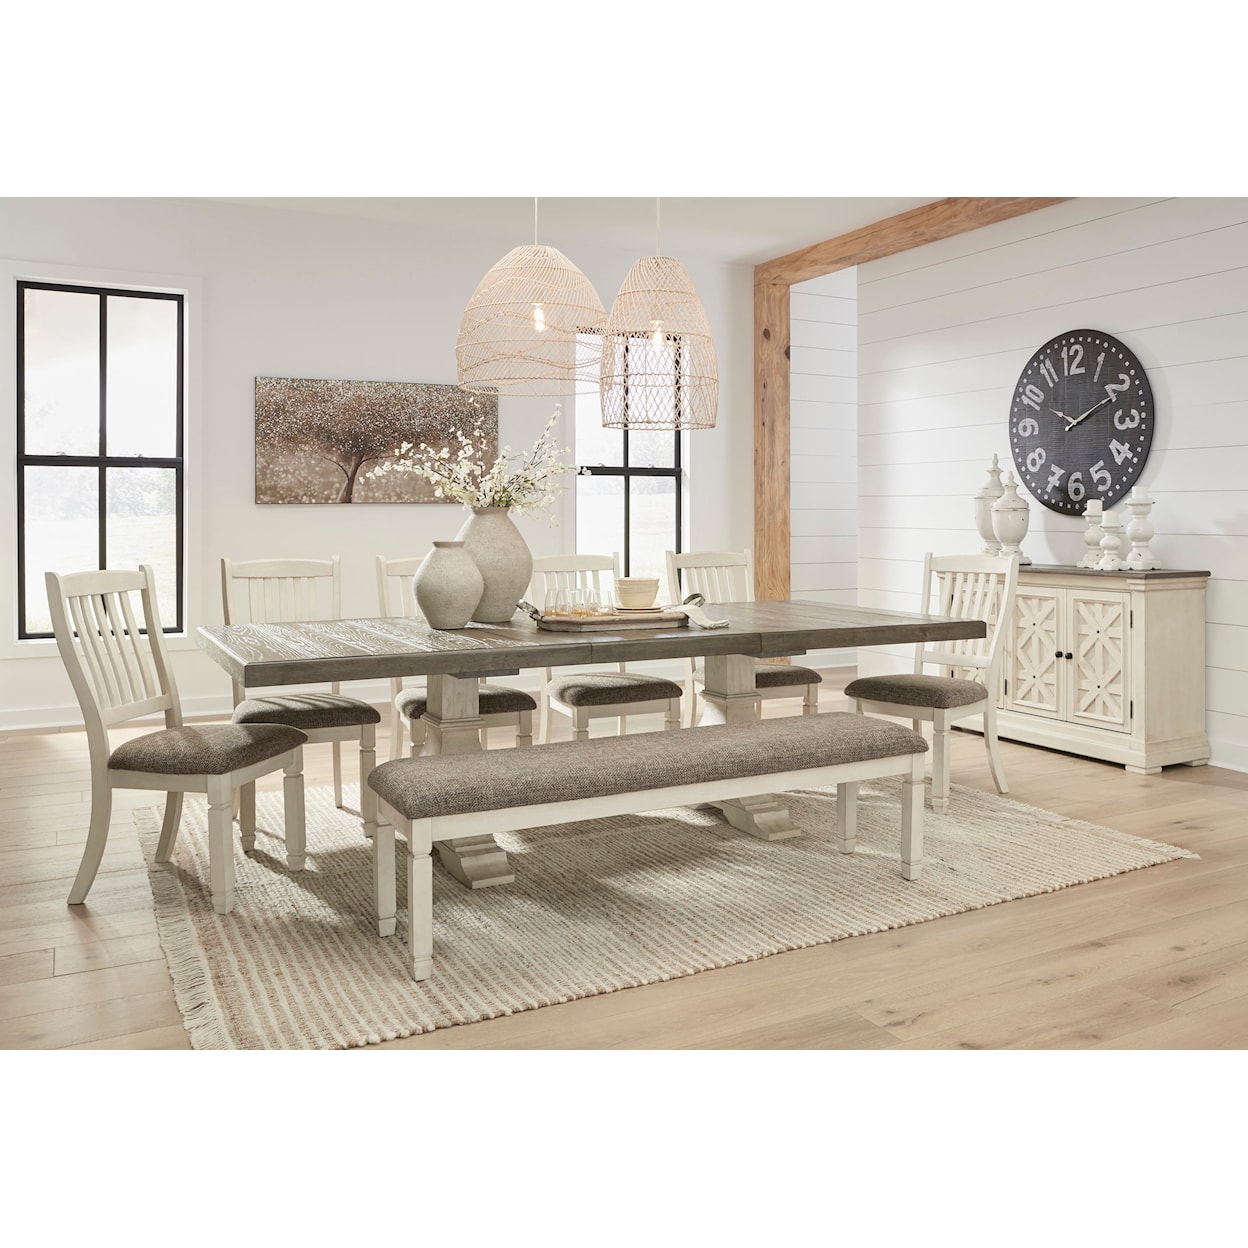 Signature Design by Ashley Furniture Bolanburg 8-Piece Dining Set with Bench